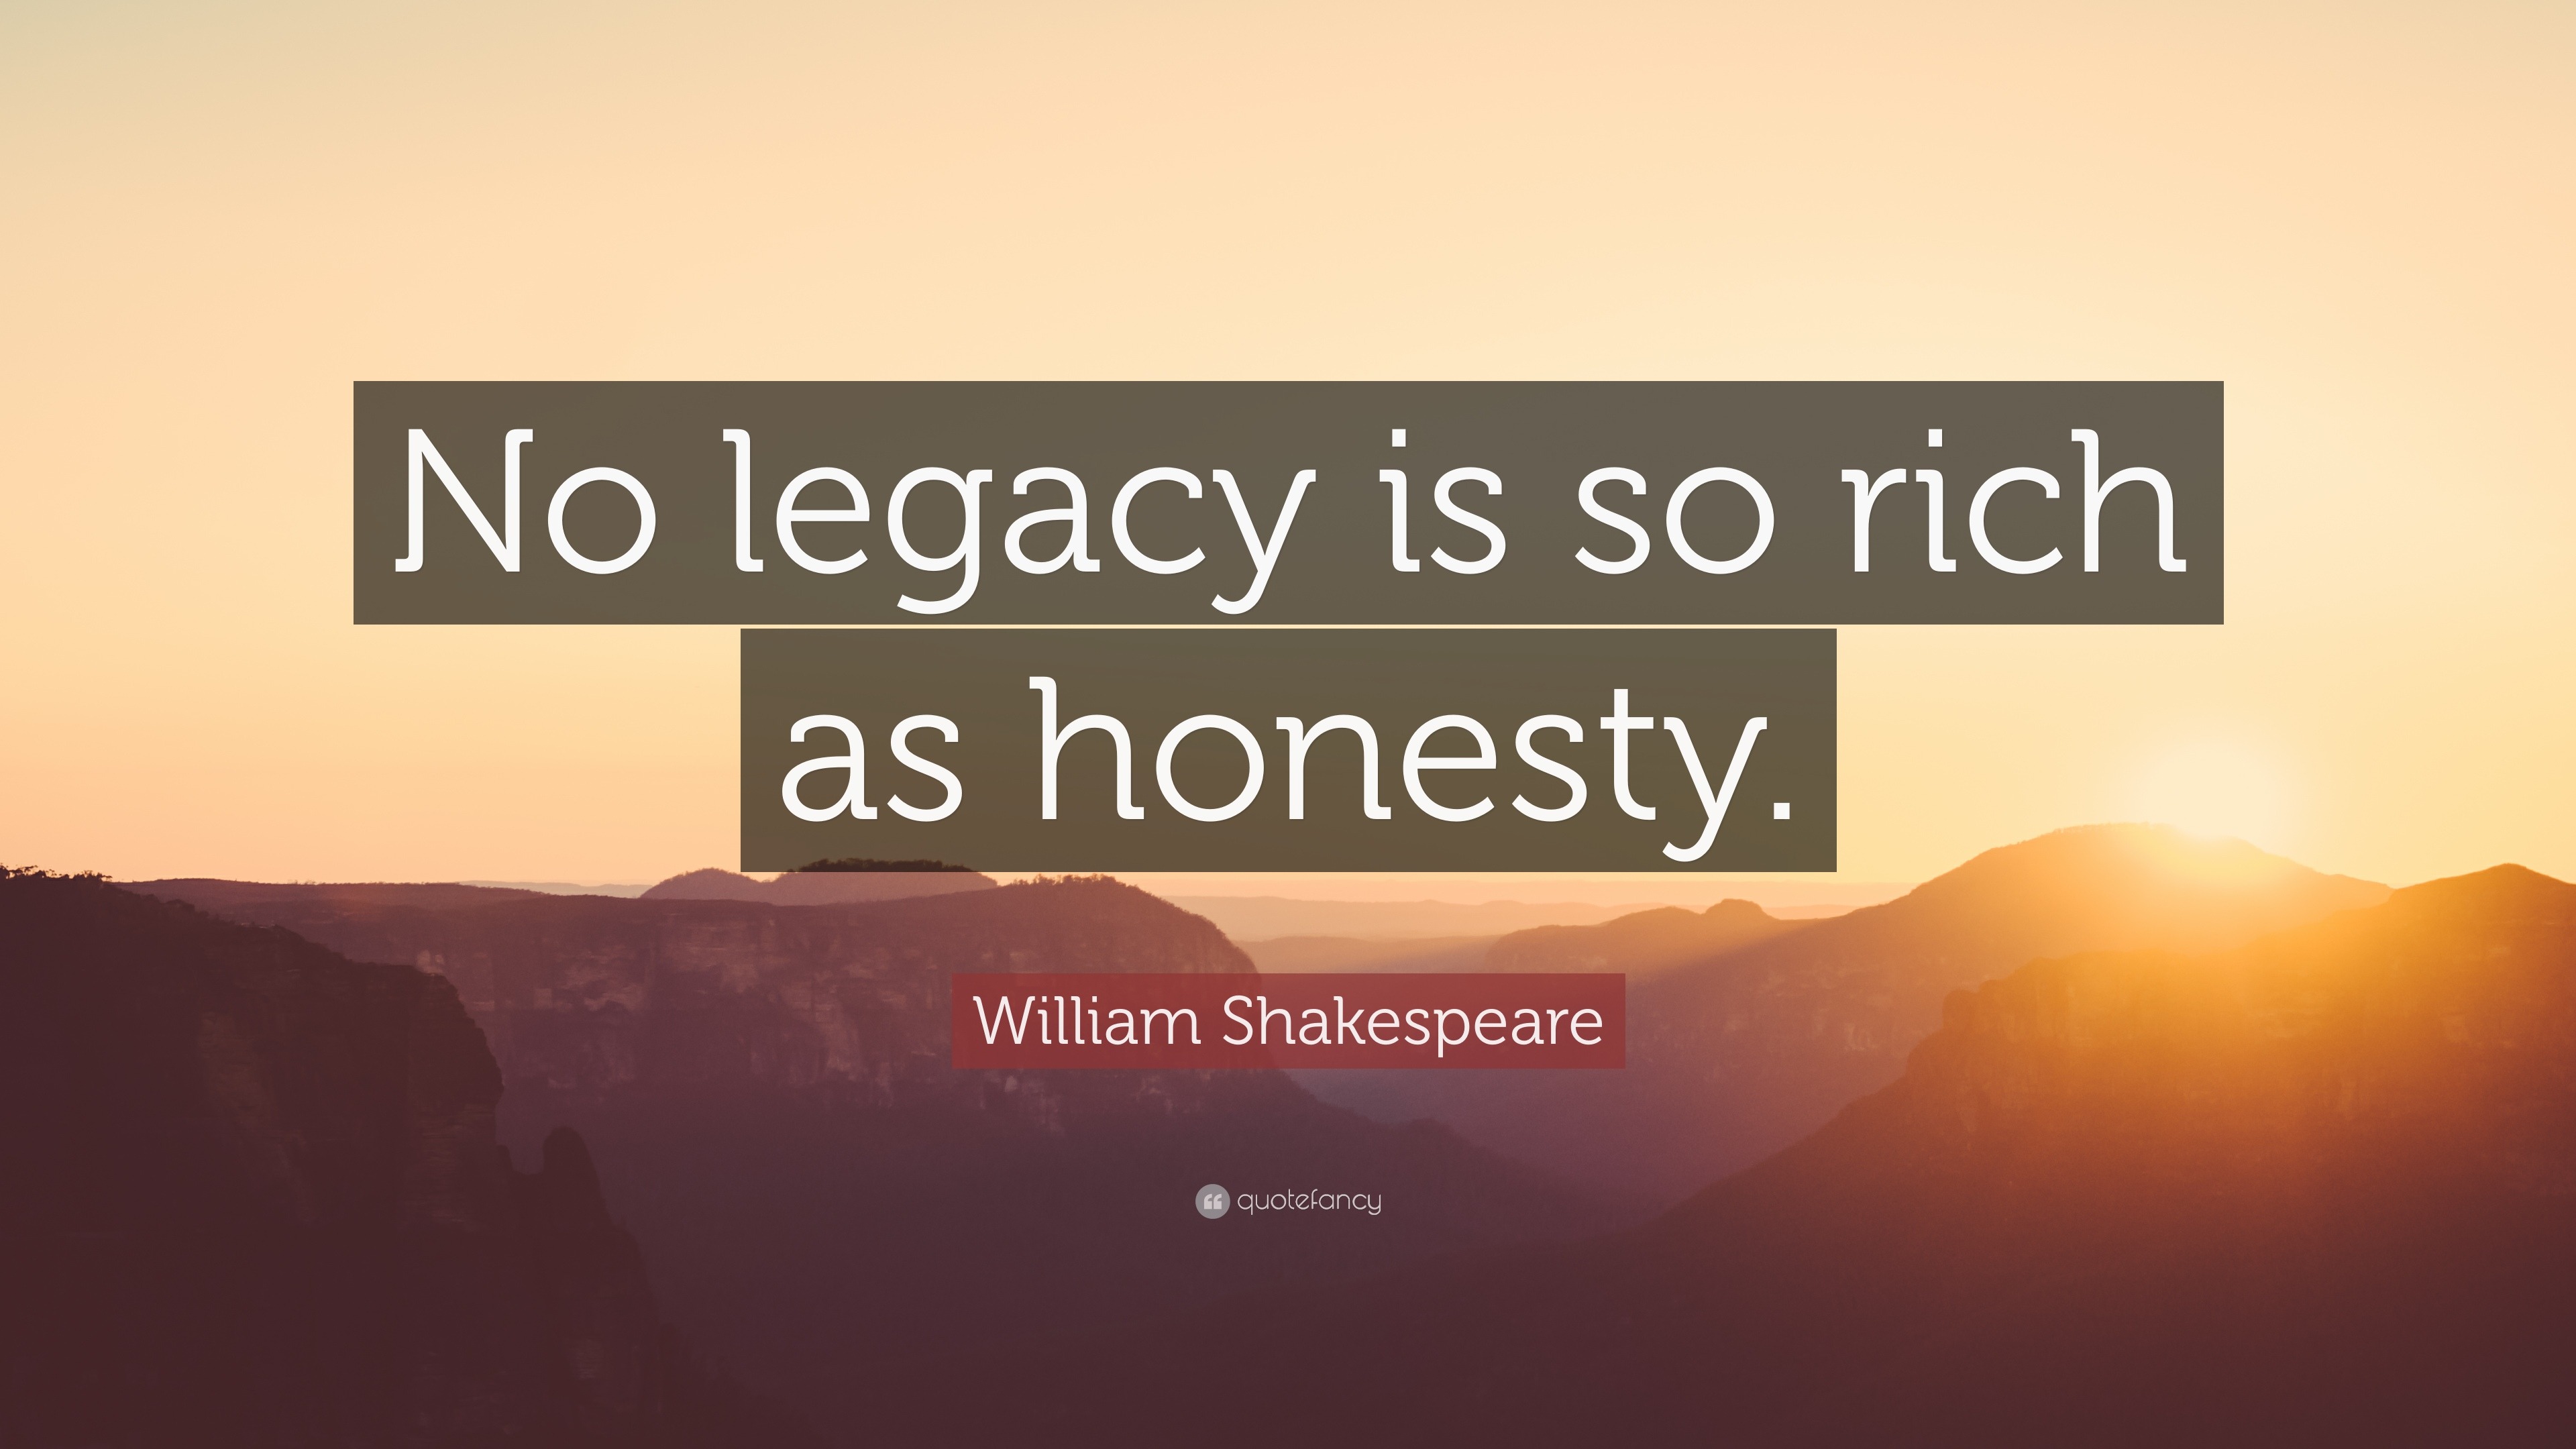 William Shakespeare Quote: “No legacy is so rich as honesty.” (12